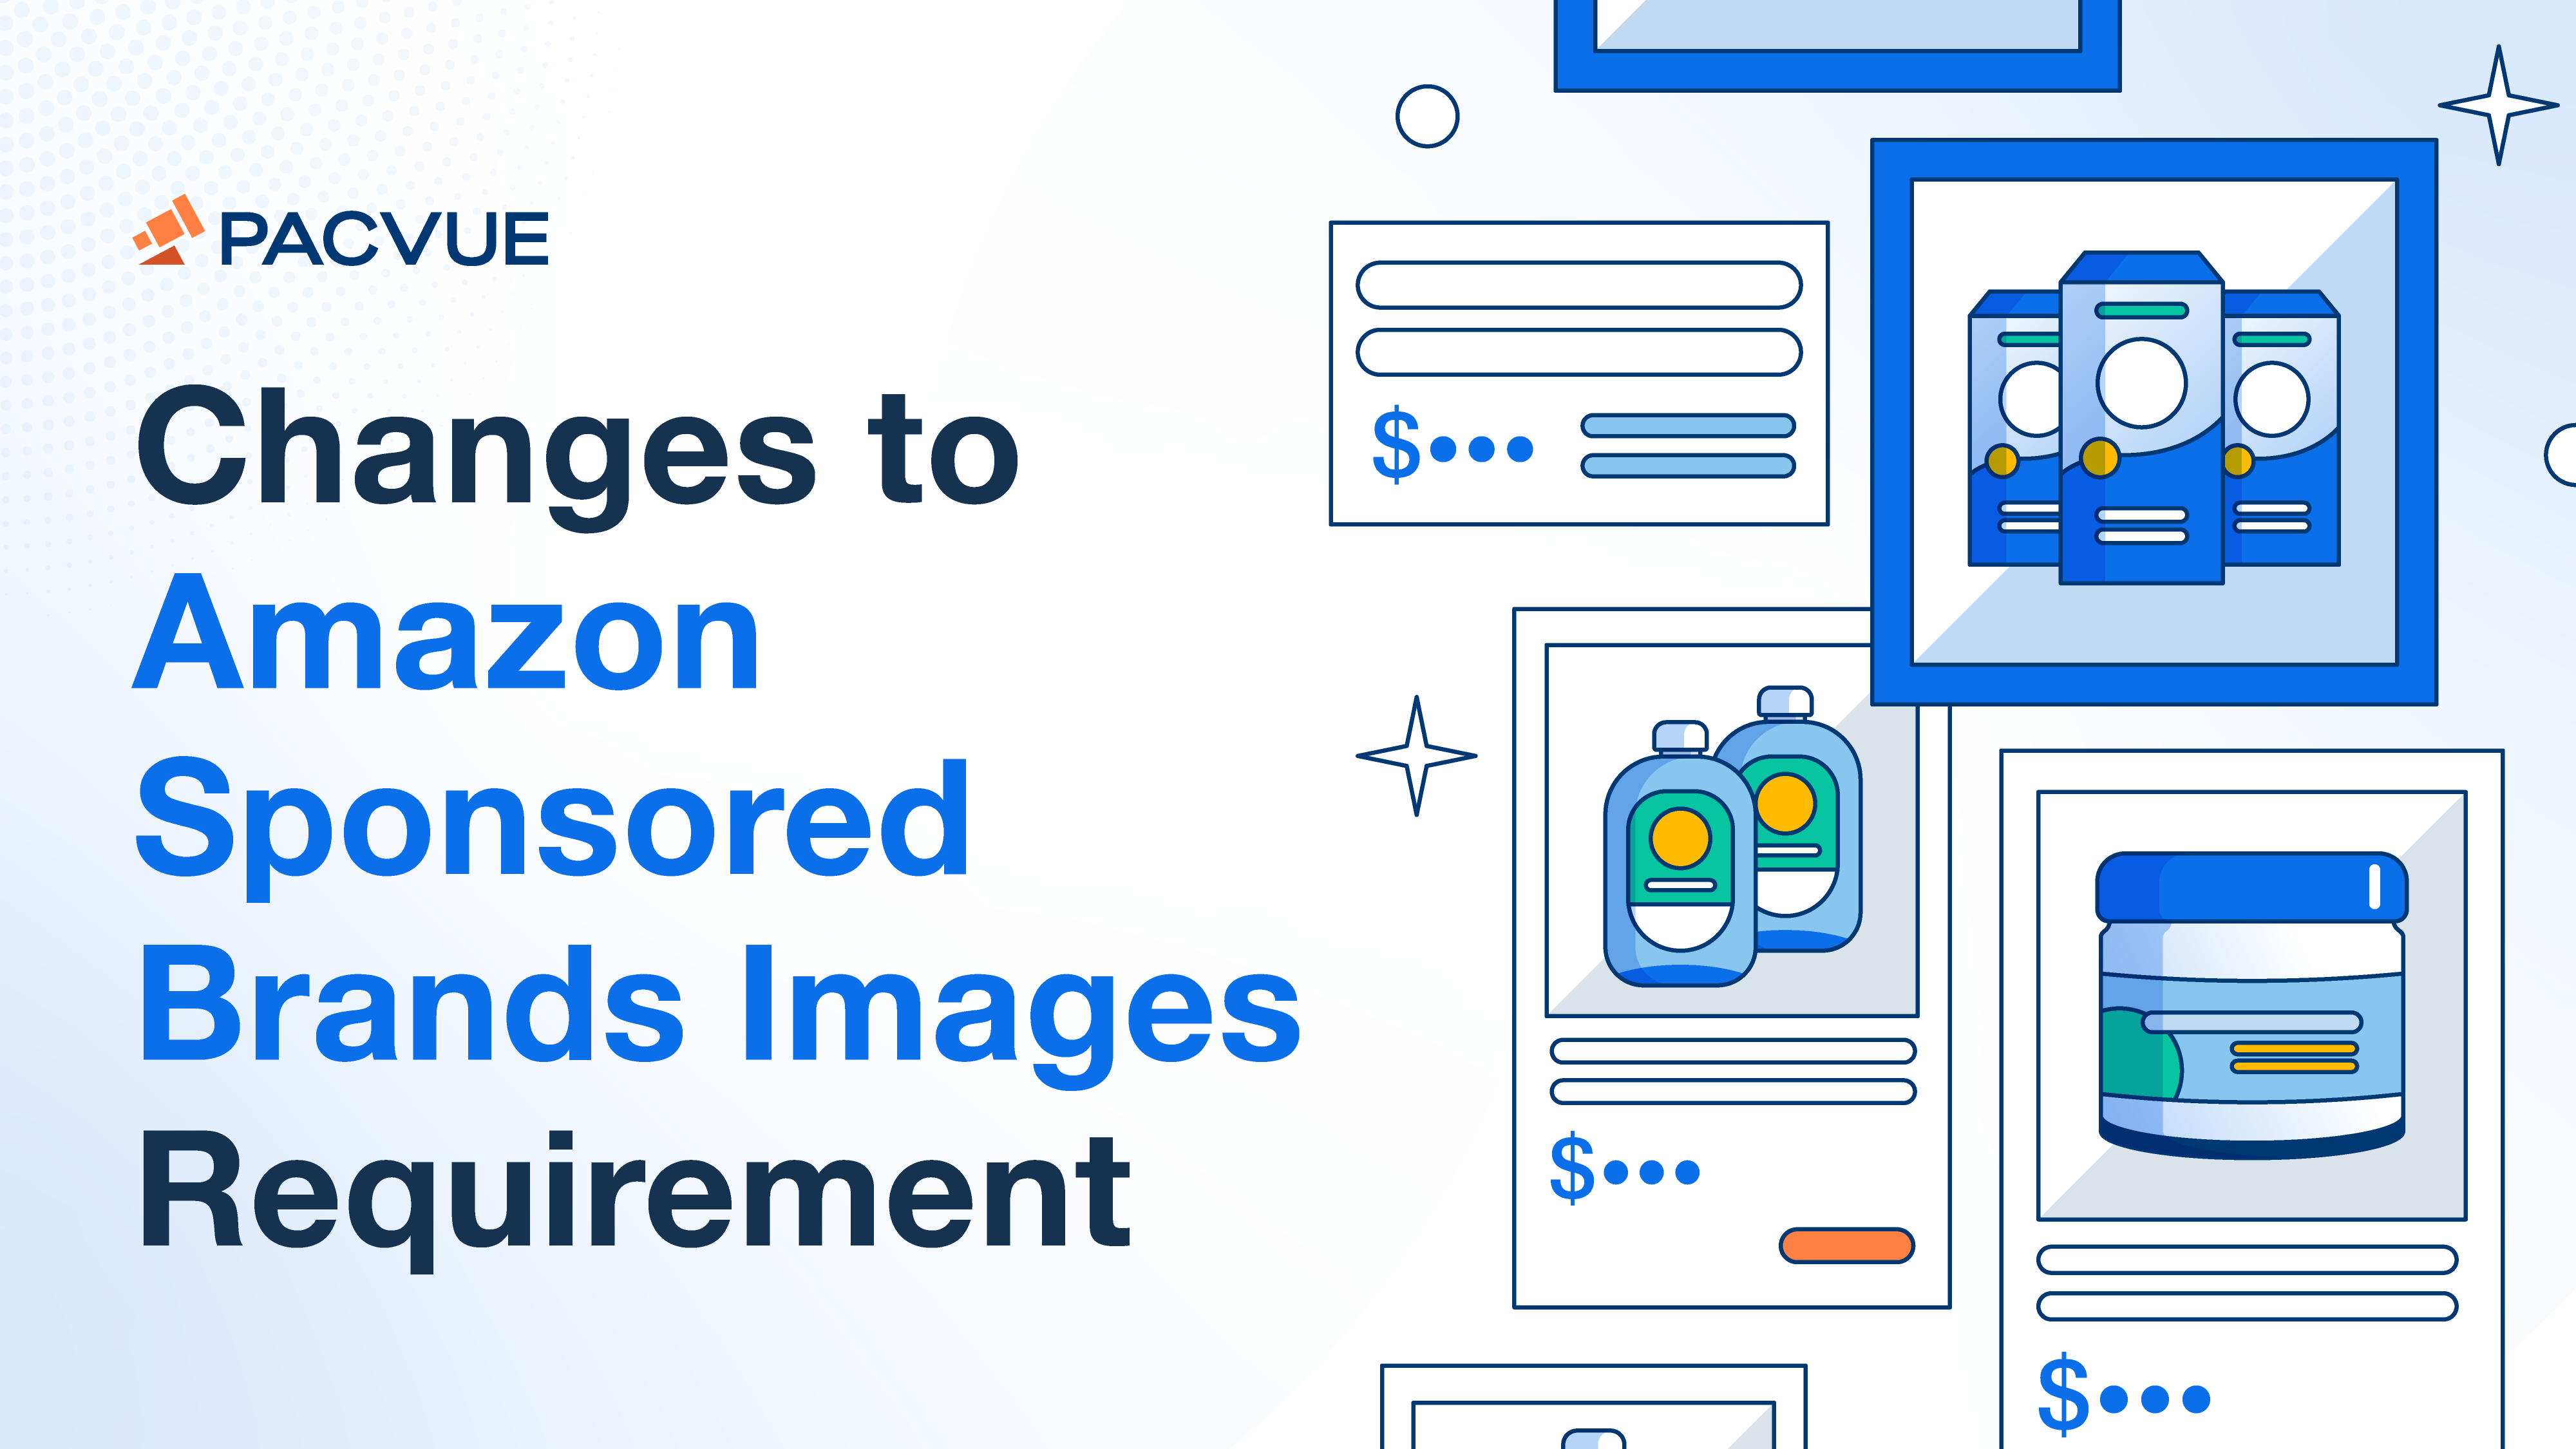 Changes to Amazon Sponsored Brands Images Requirement